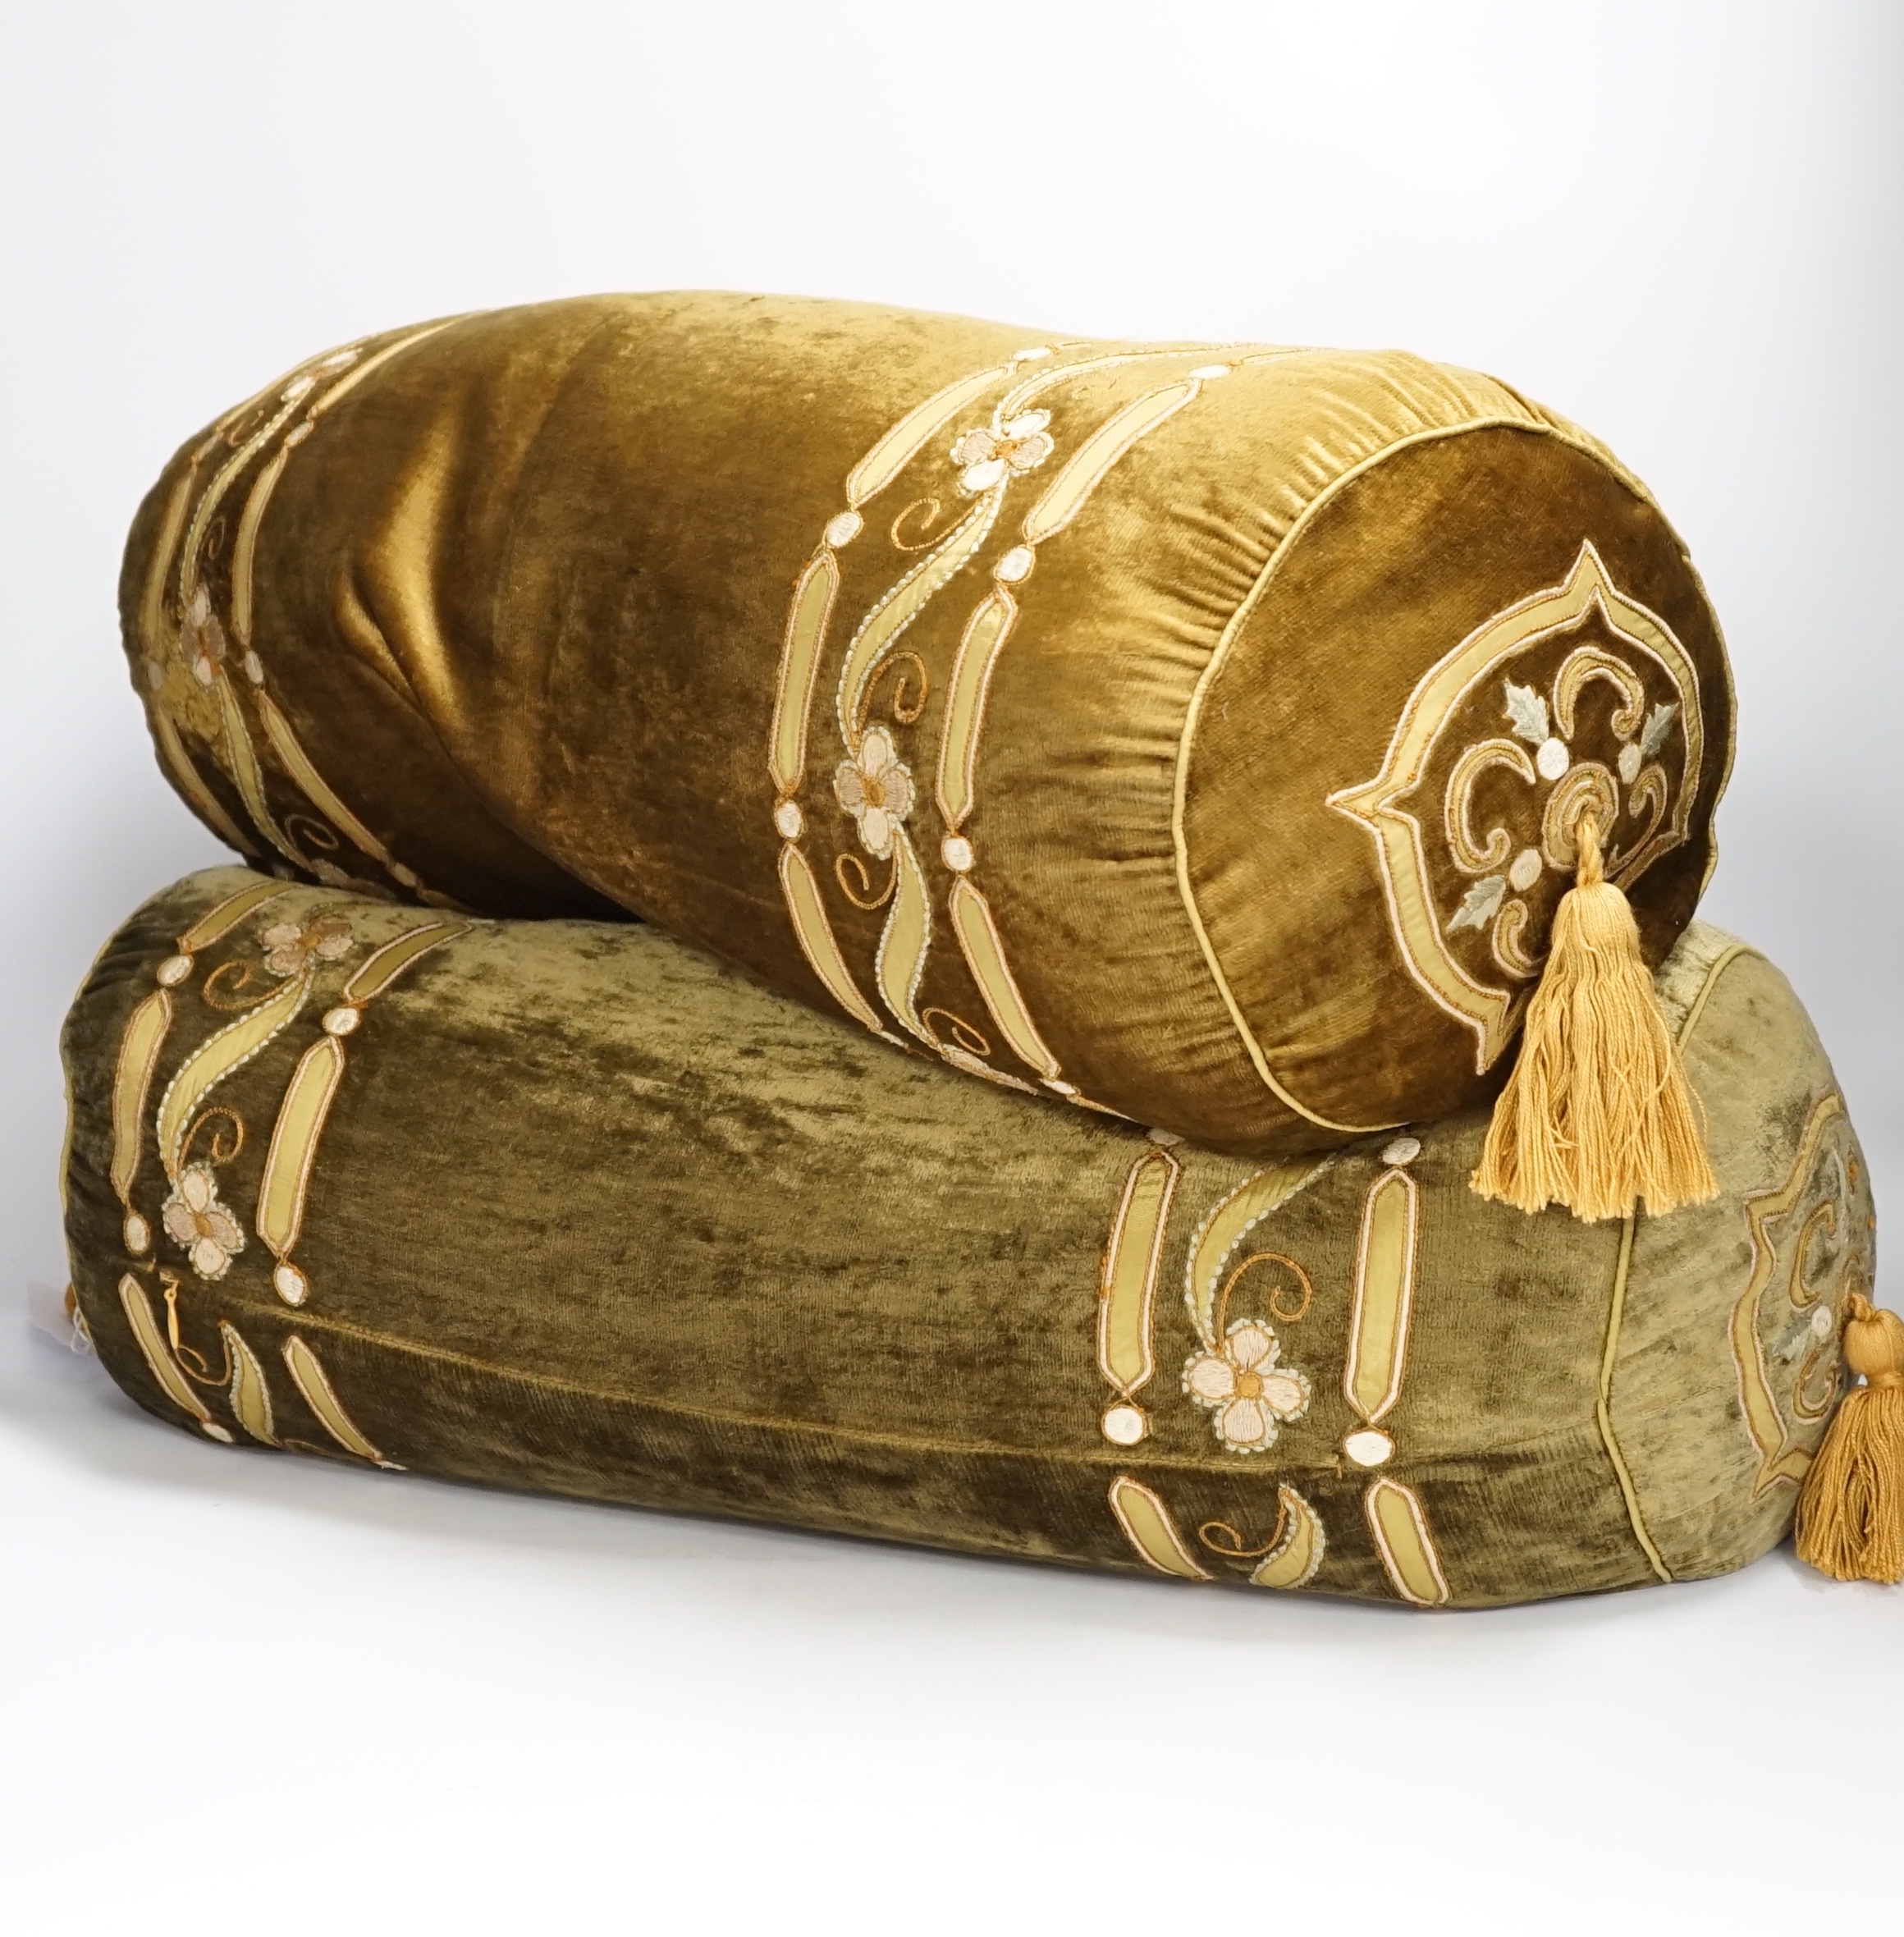 A pair of 20th century olive green silk velvet bolster cushions designed with appliqué, embroidered decoration and cording, finished with gold tassels to each end, 52cms long                                              